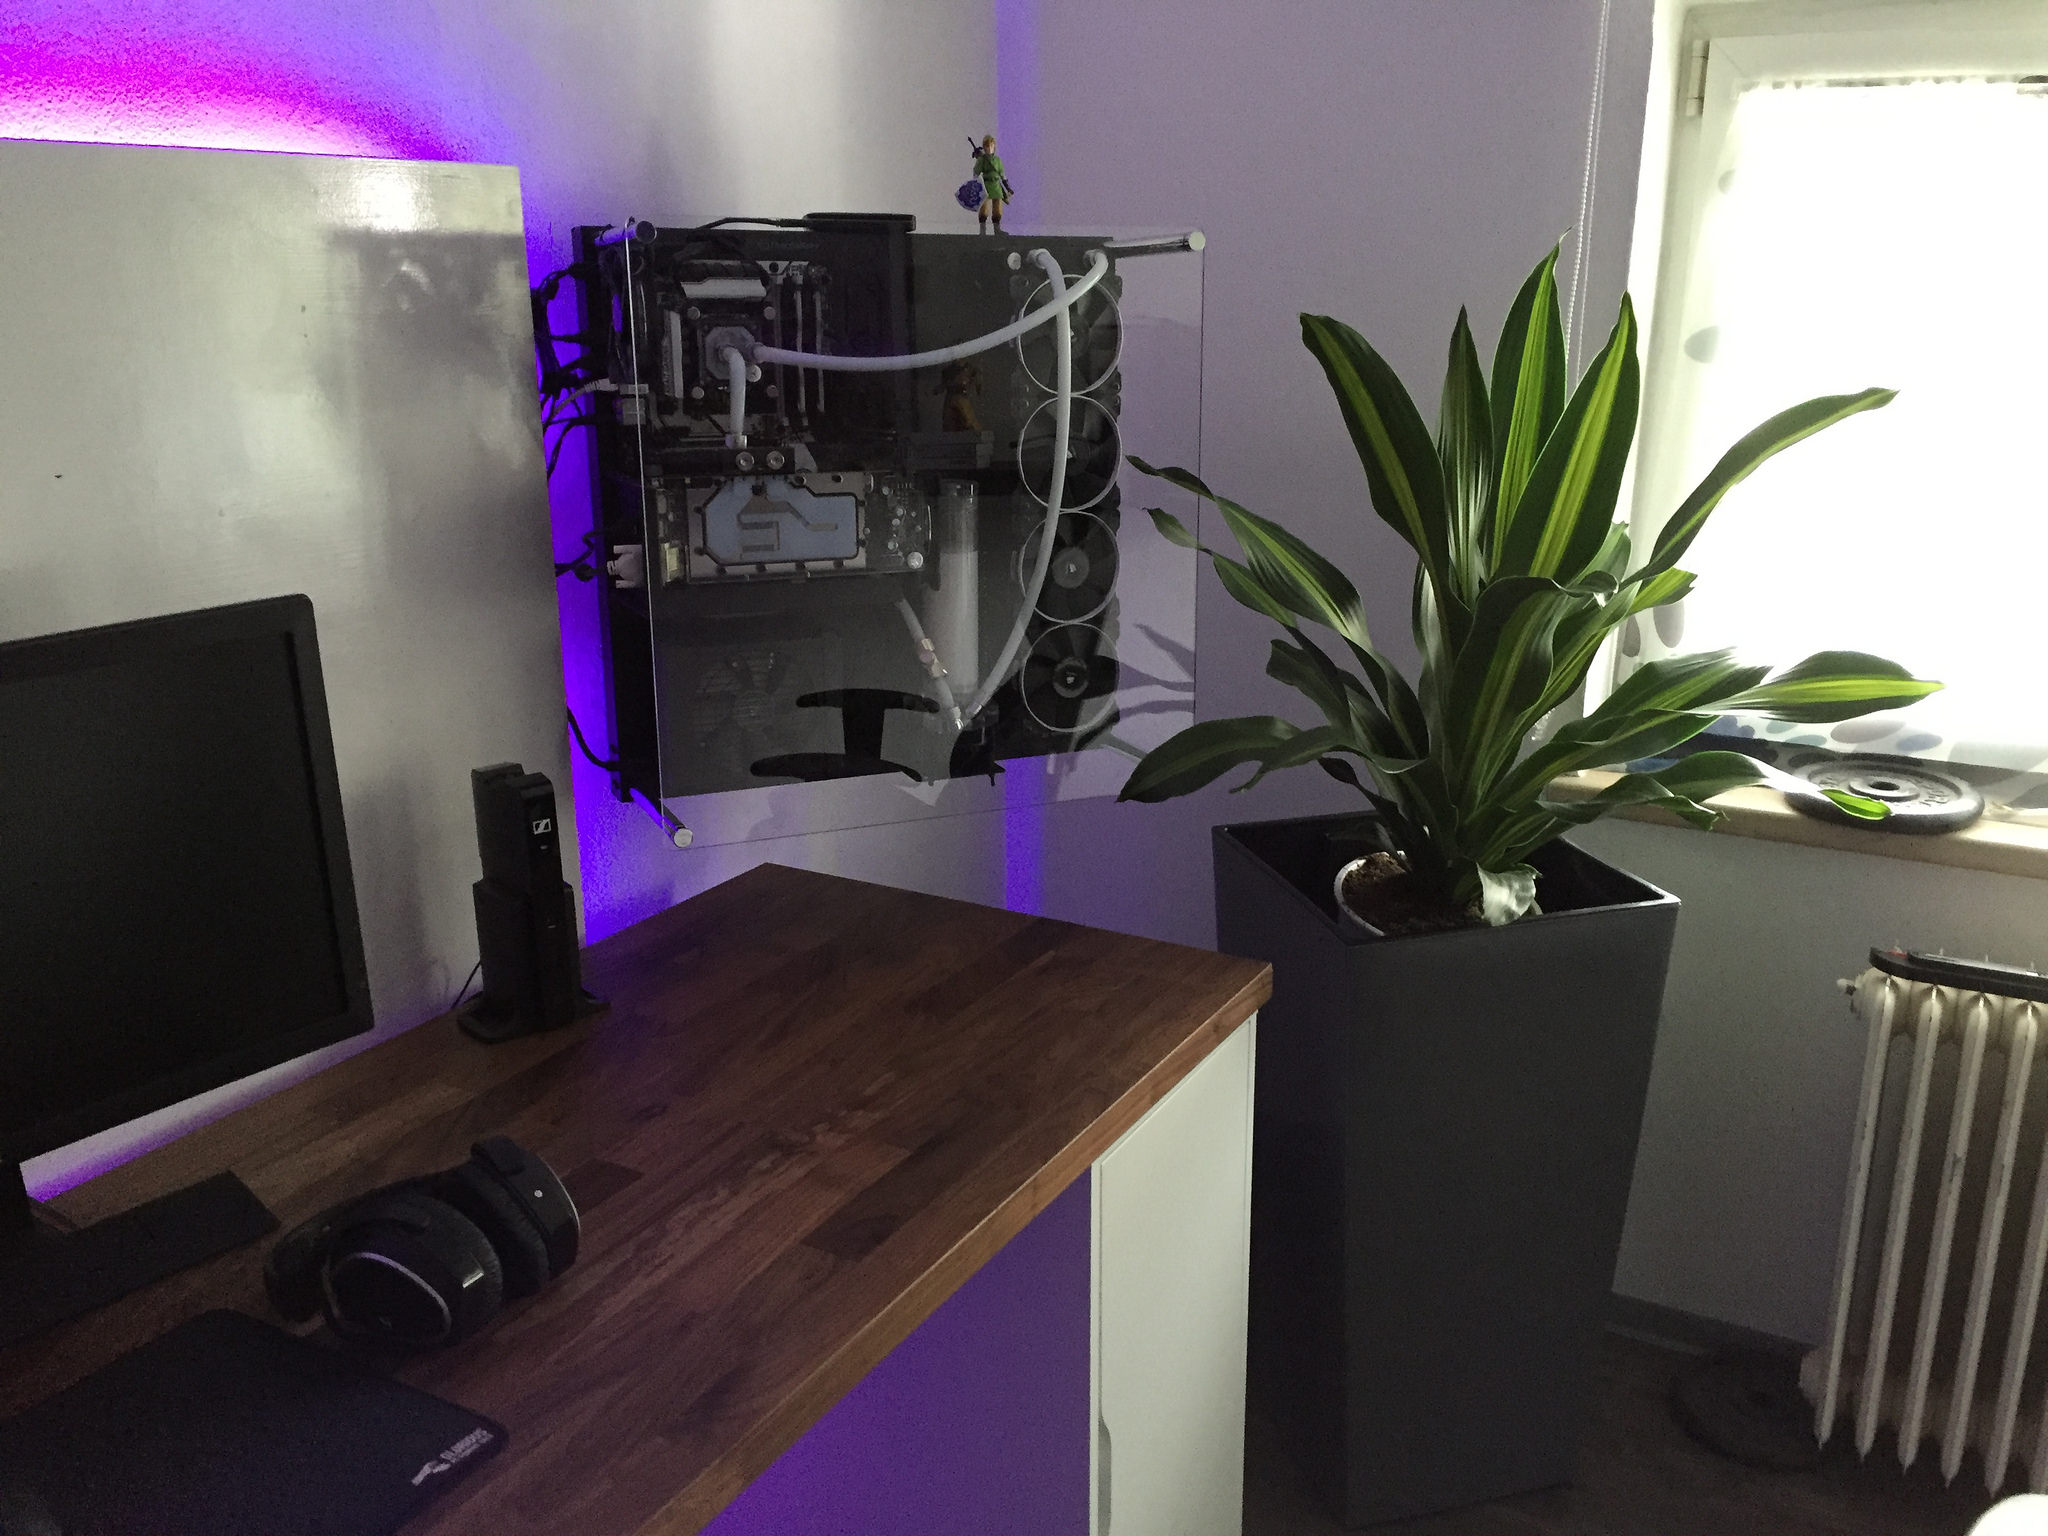 The Wall Mounted Workspace